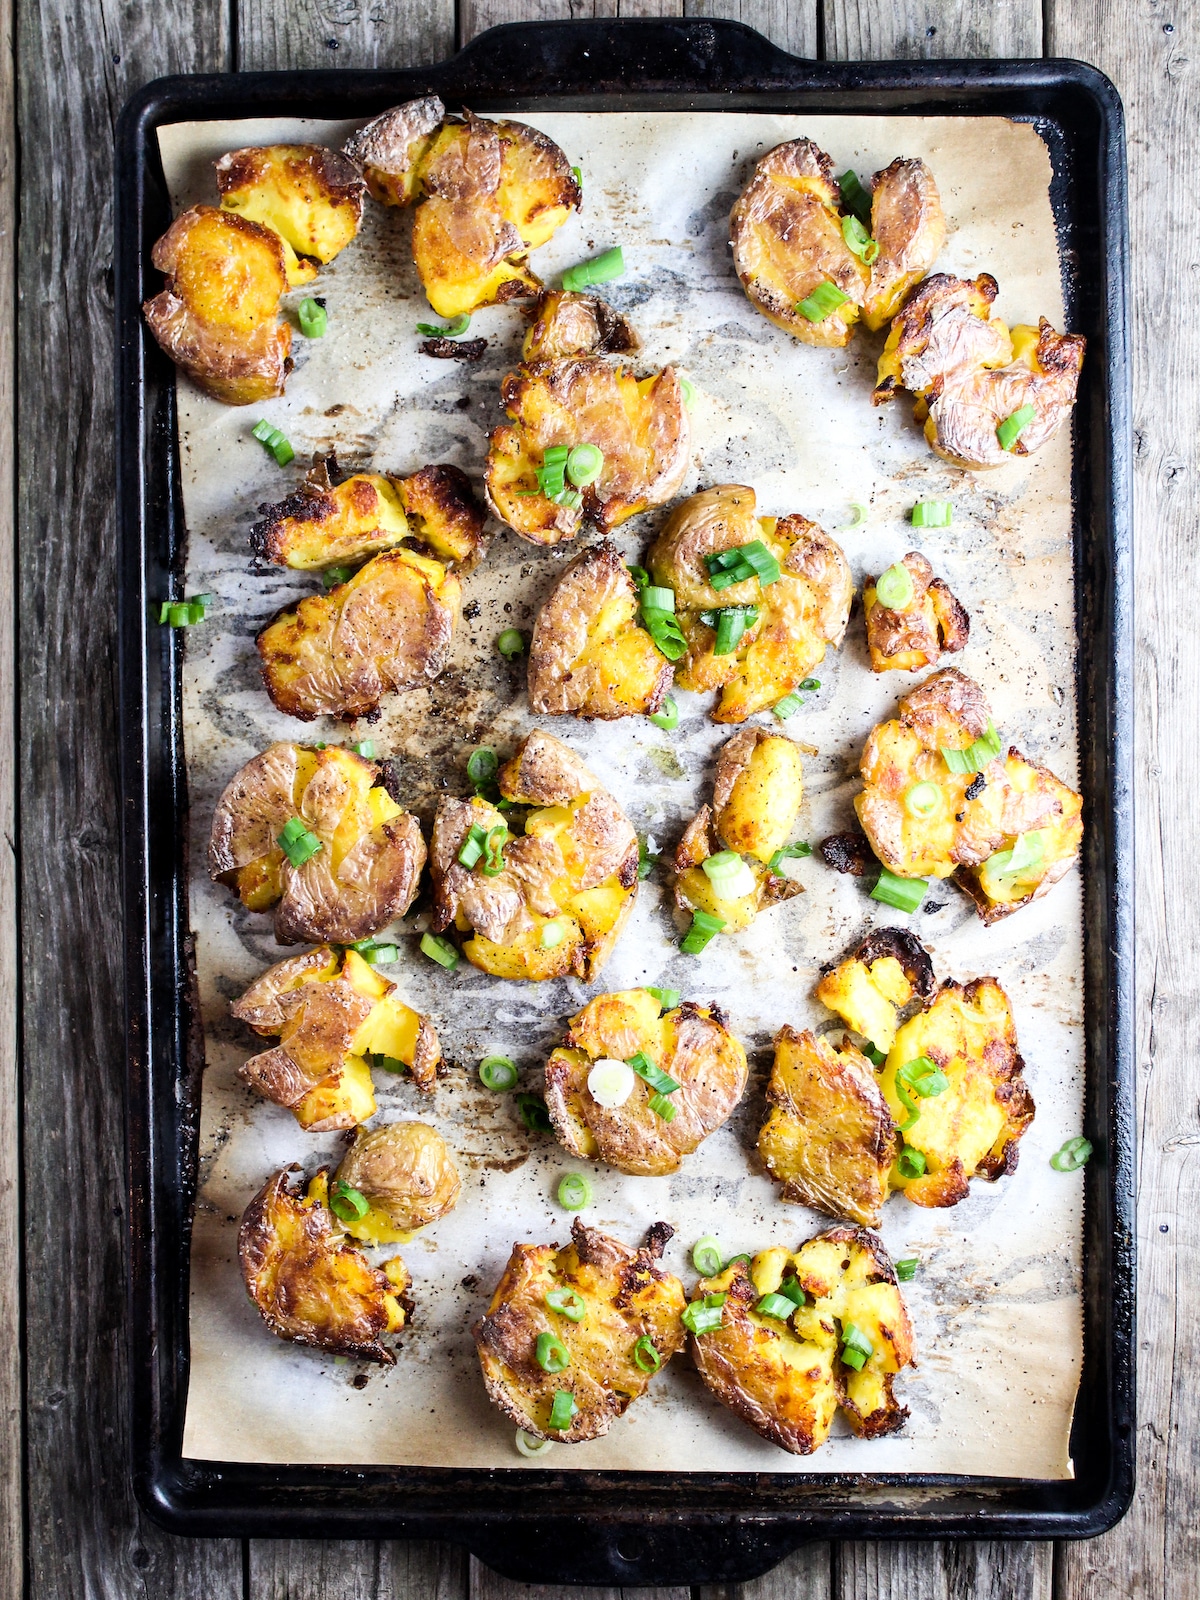 Crispy smashed potatoes on a baking sheet with green onions.